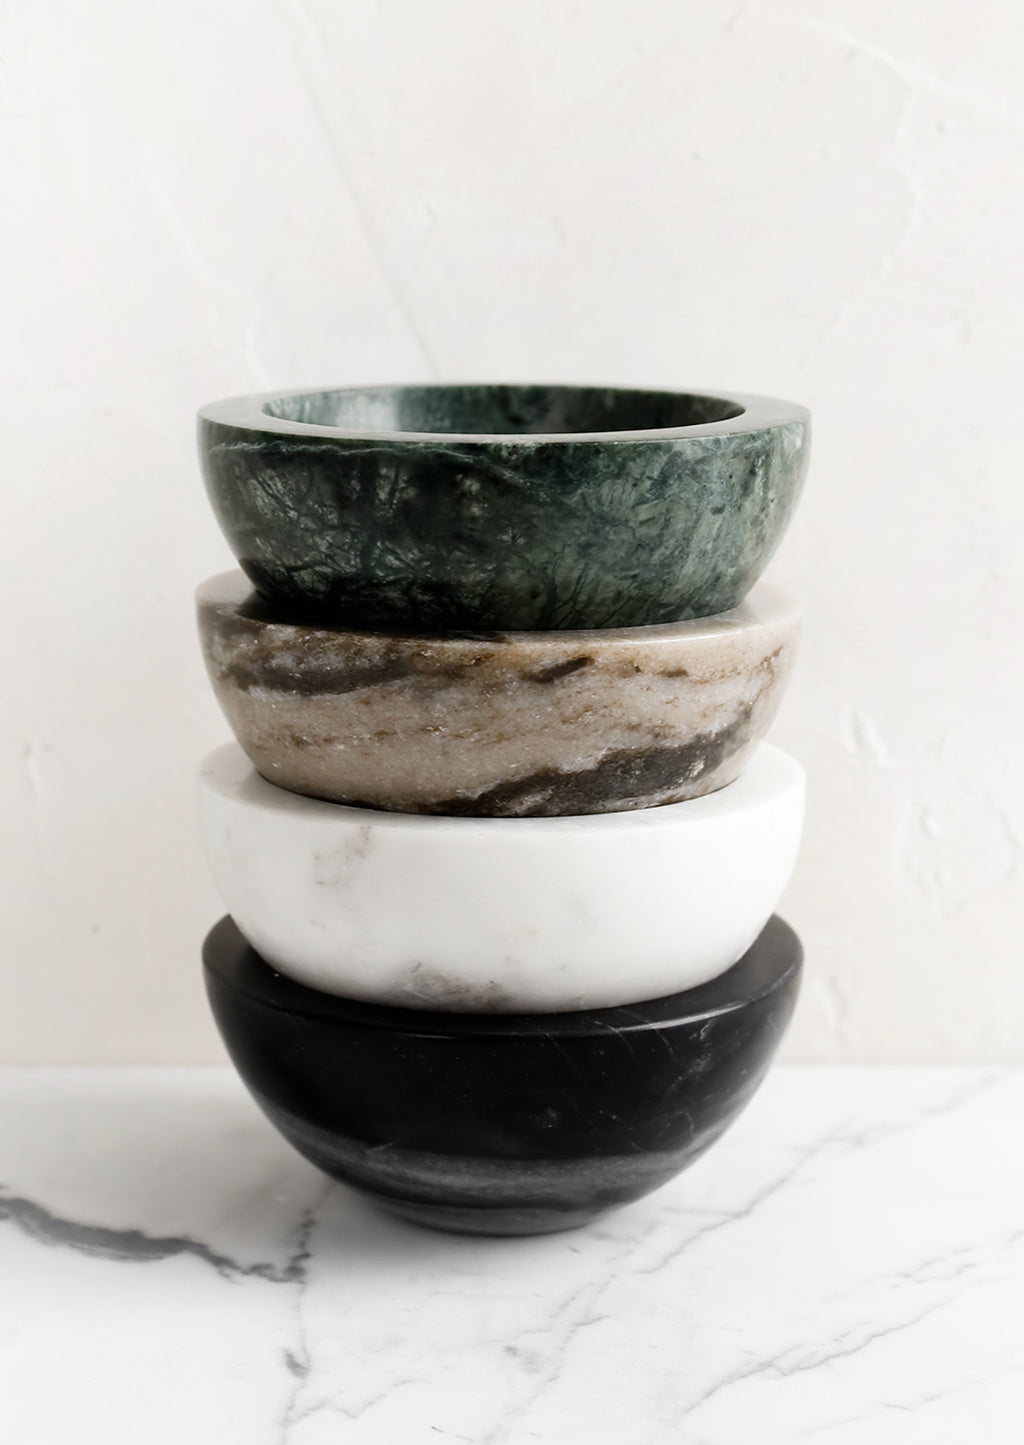 1: A stack of four small marble bowls in assorted colors.